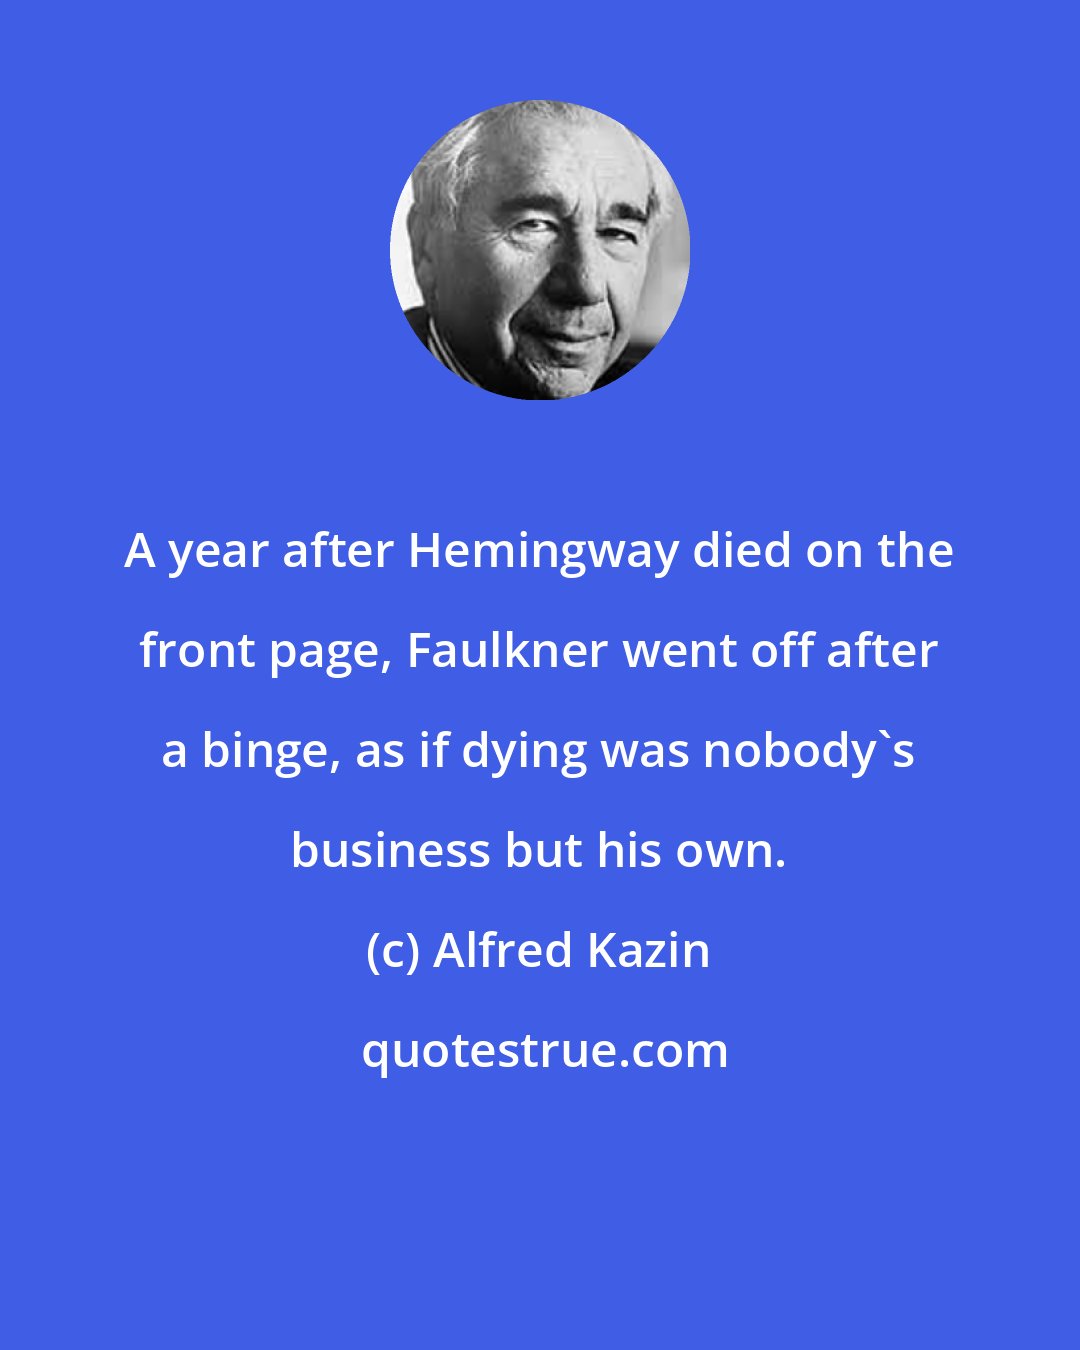 Alfred Kazin: A year after Hemingway died on the front page, Faulkner went off after a binge, as if dying was nobody's business but his own.